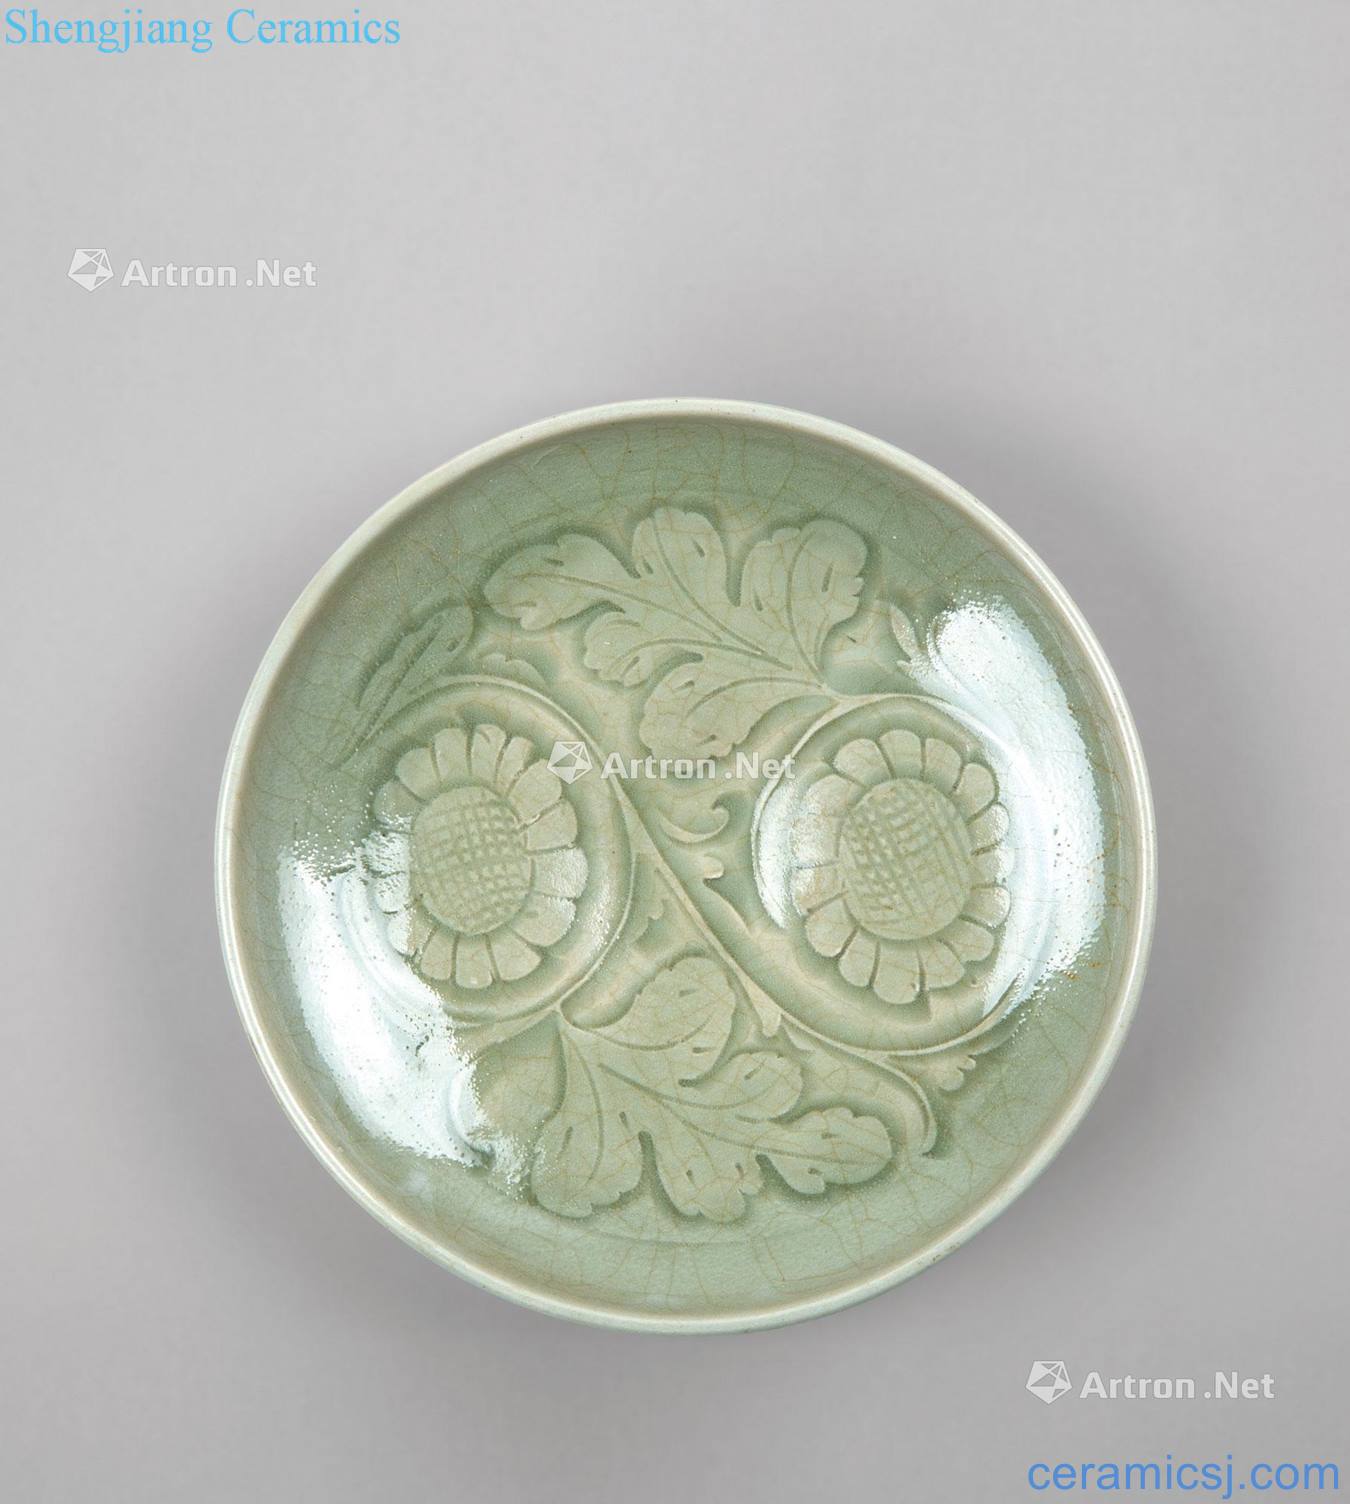 Northern song dynasty yao state kiln flower tray